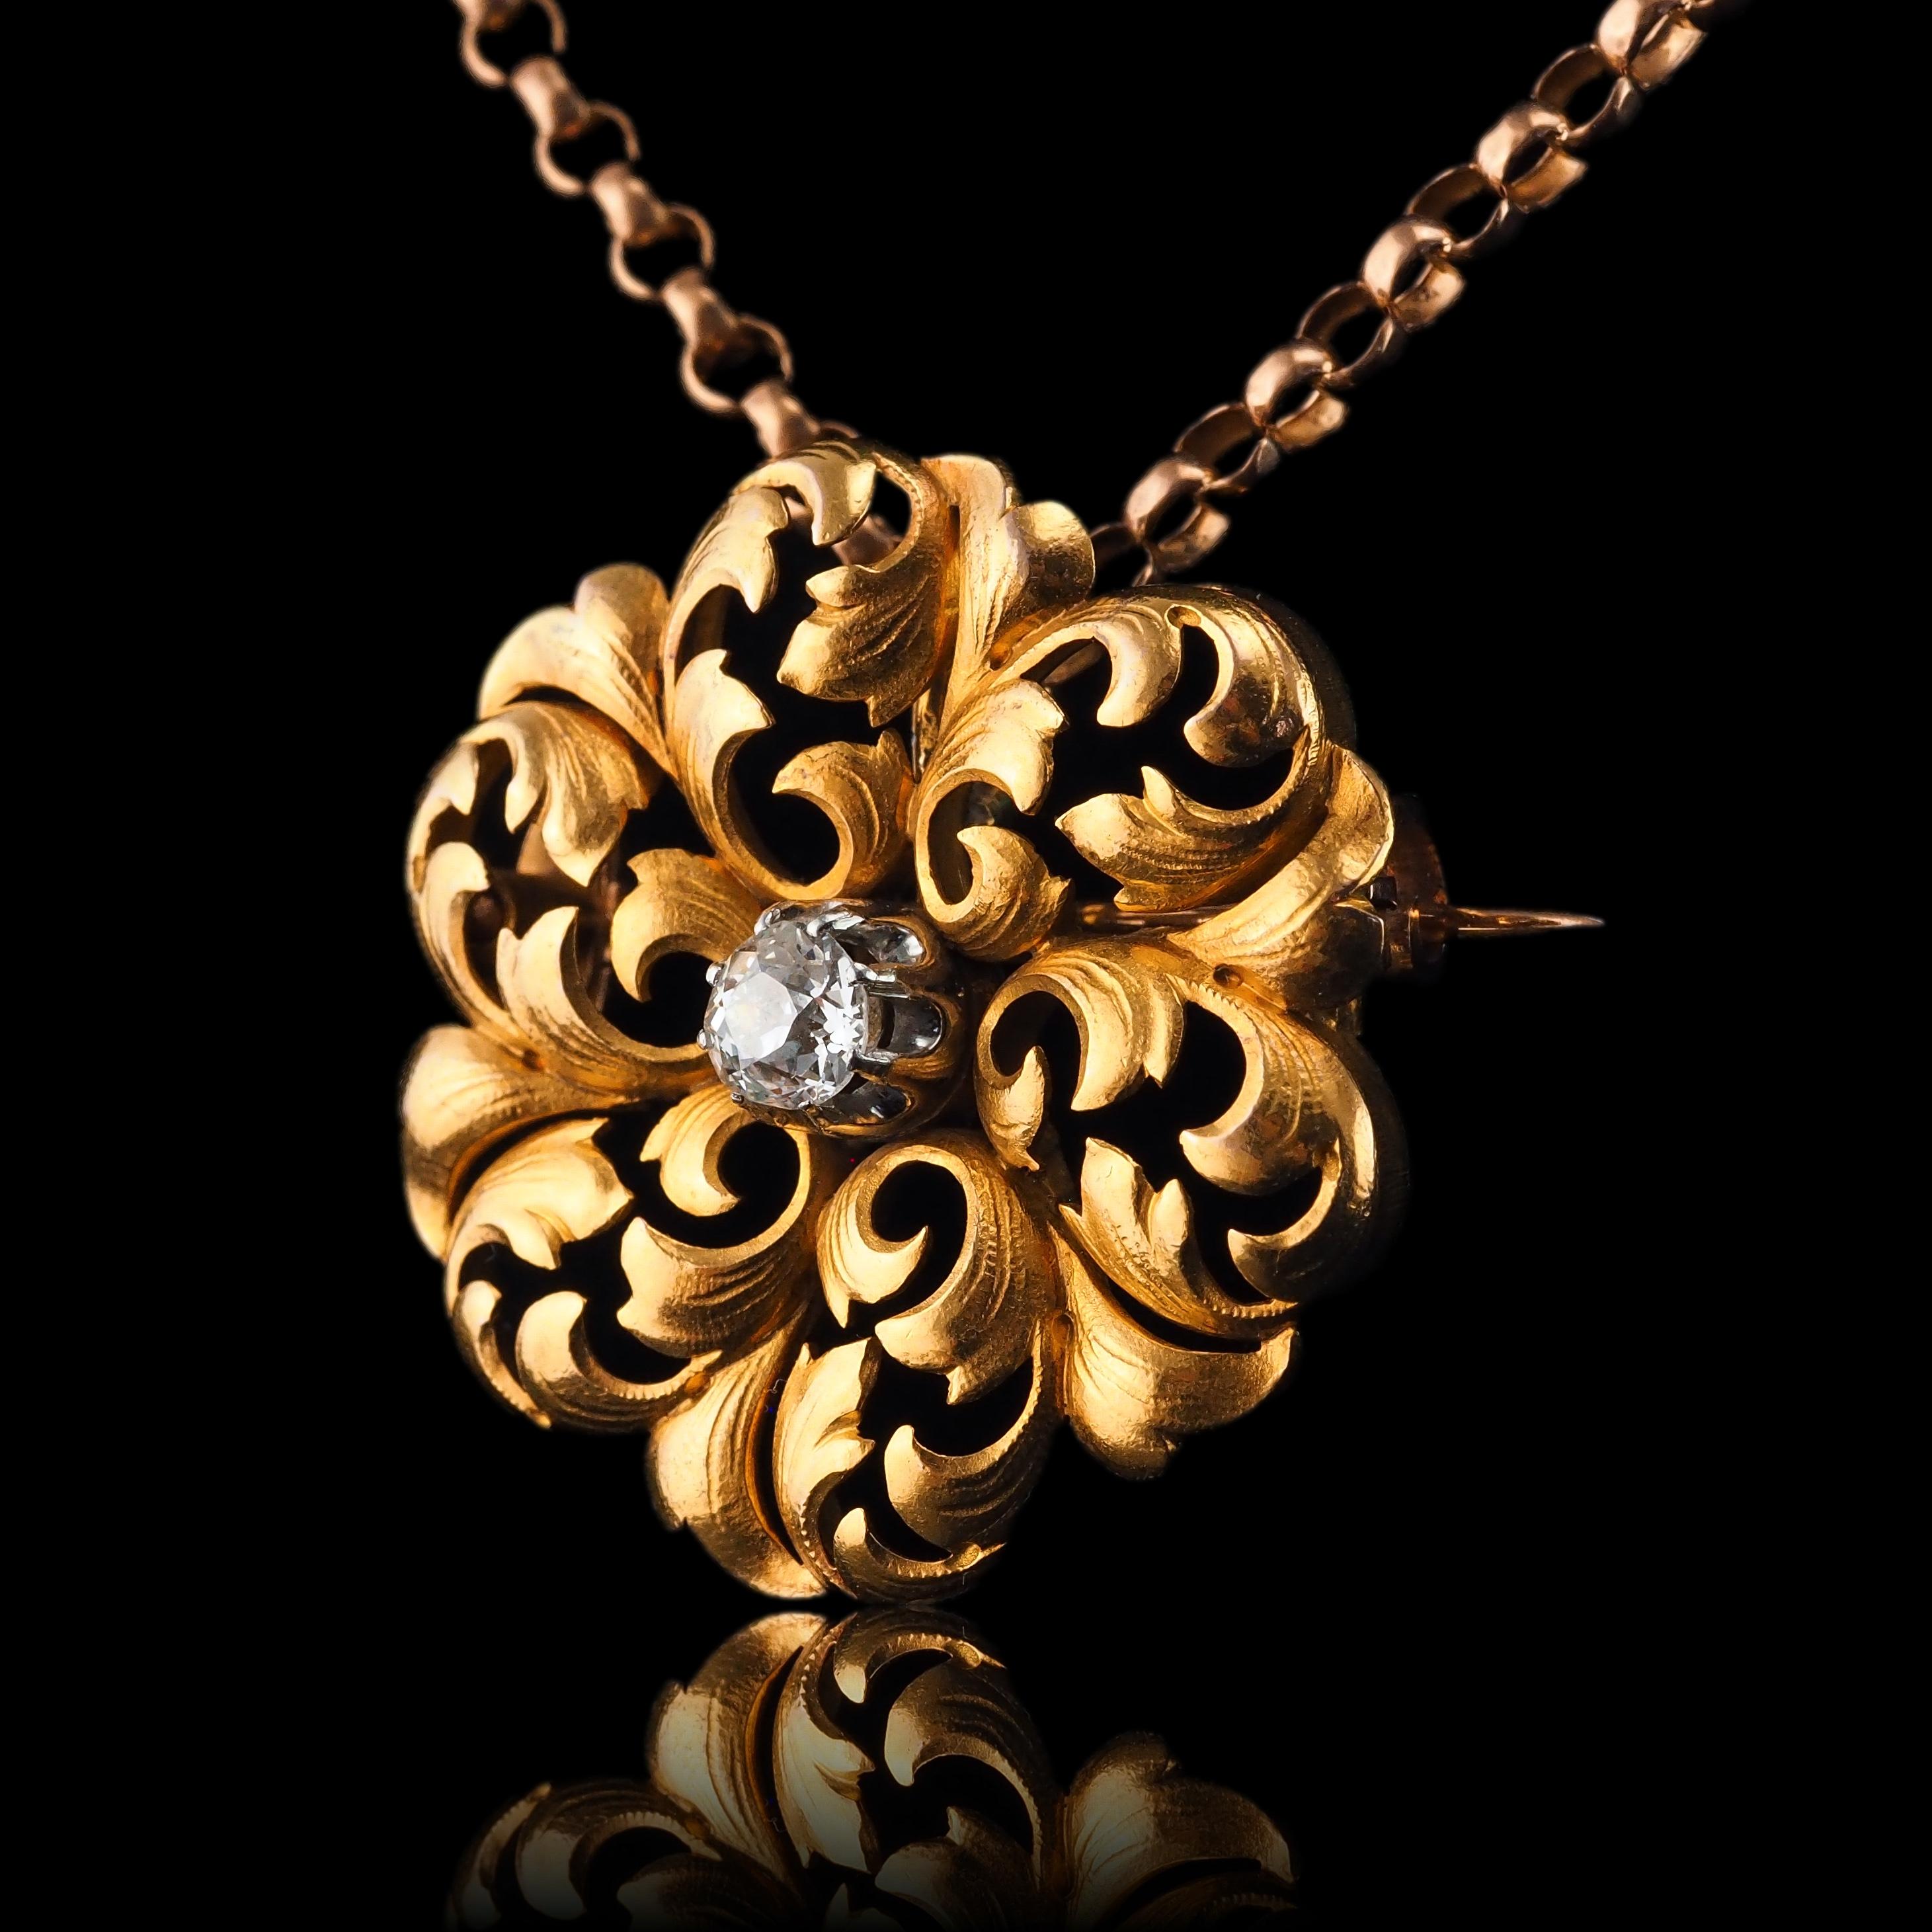 Antique French Diamond Necklace 18K Gold Pendant Brooch 19th C. Flower Acanthus For Sale 6